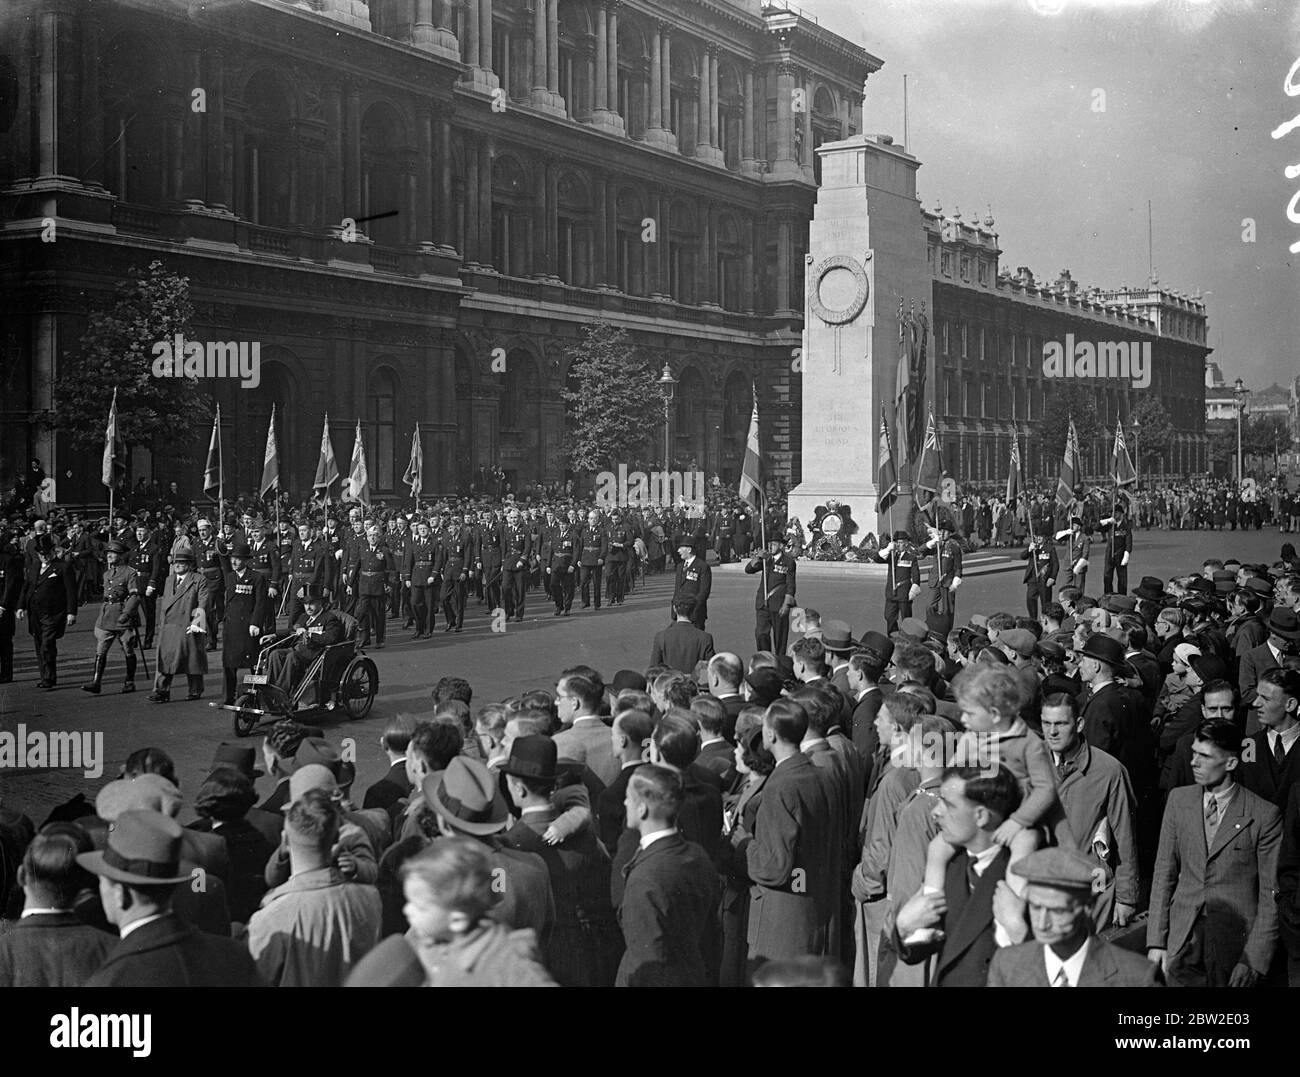 Returning from their tour of the great war battlefields, members of the special national commanders party of American Legion paraded at the Cenotaph in Whitehall and placed a wreath. 10 October 1937. Stock Photo